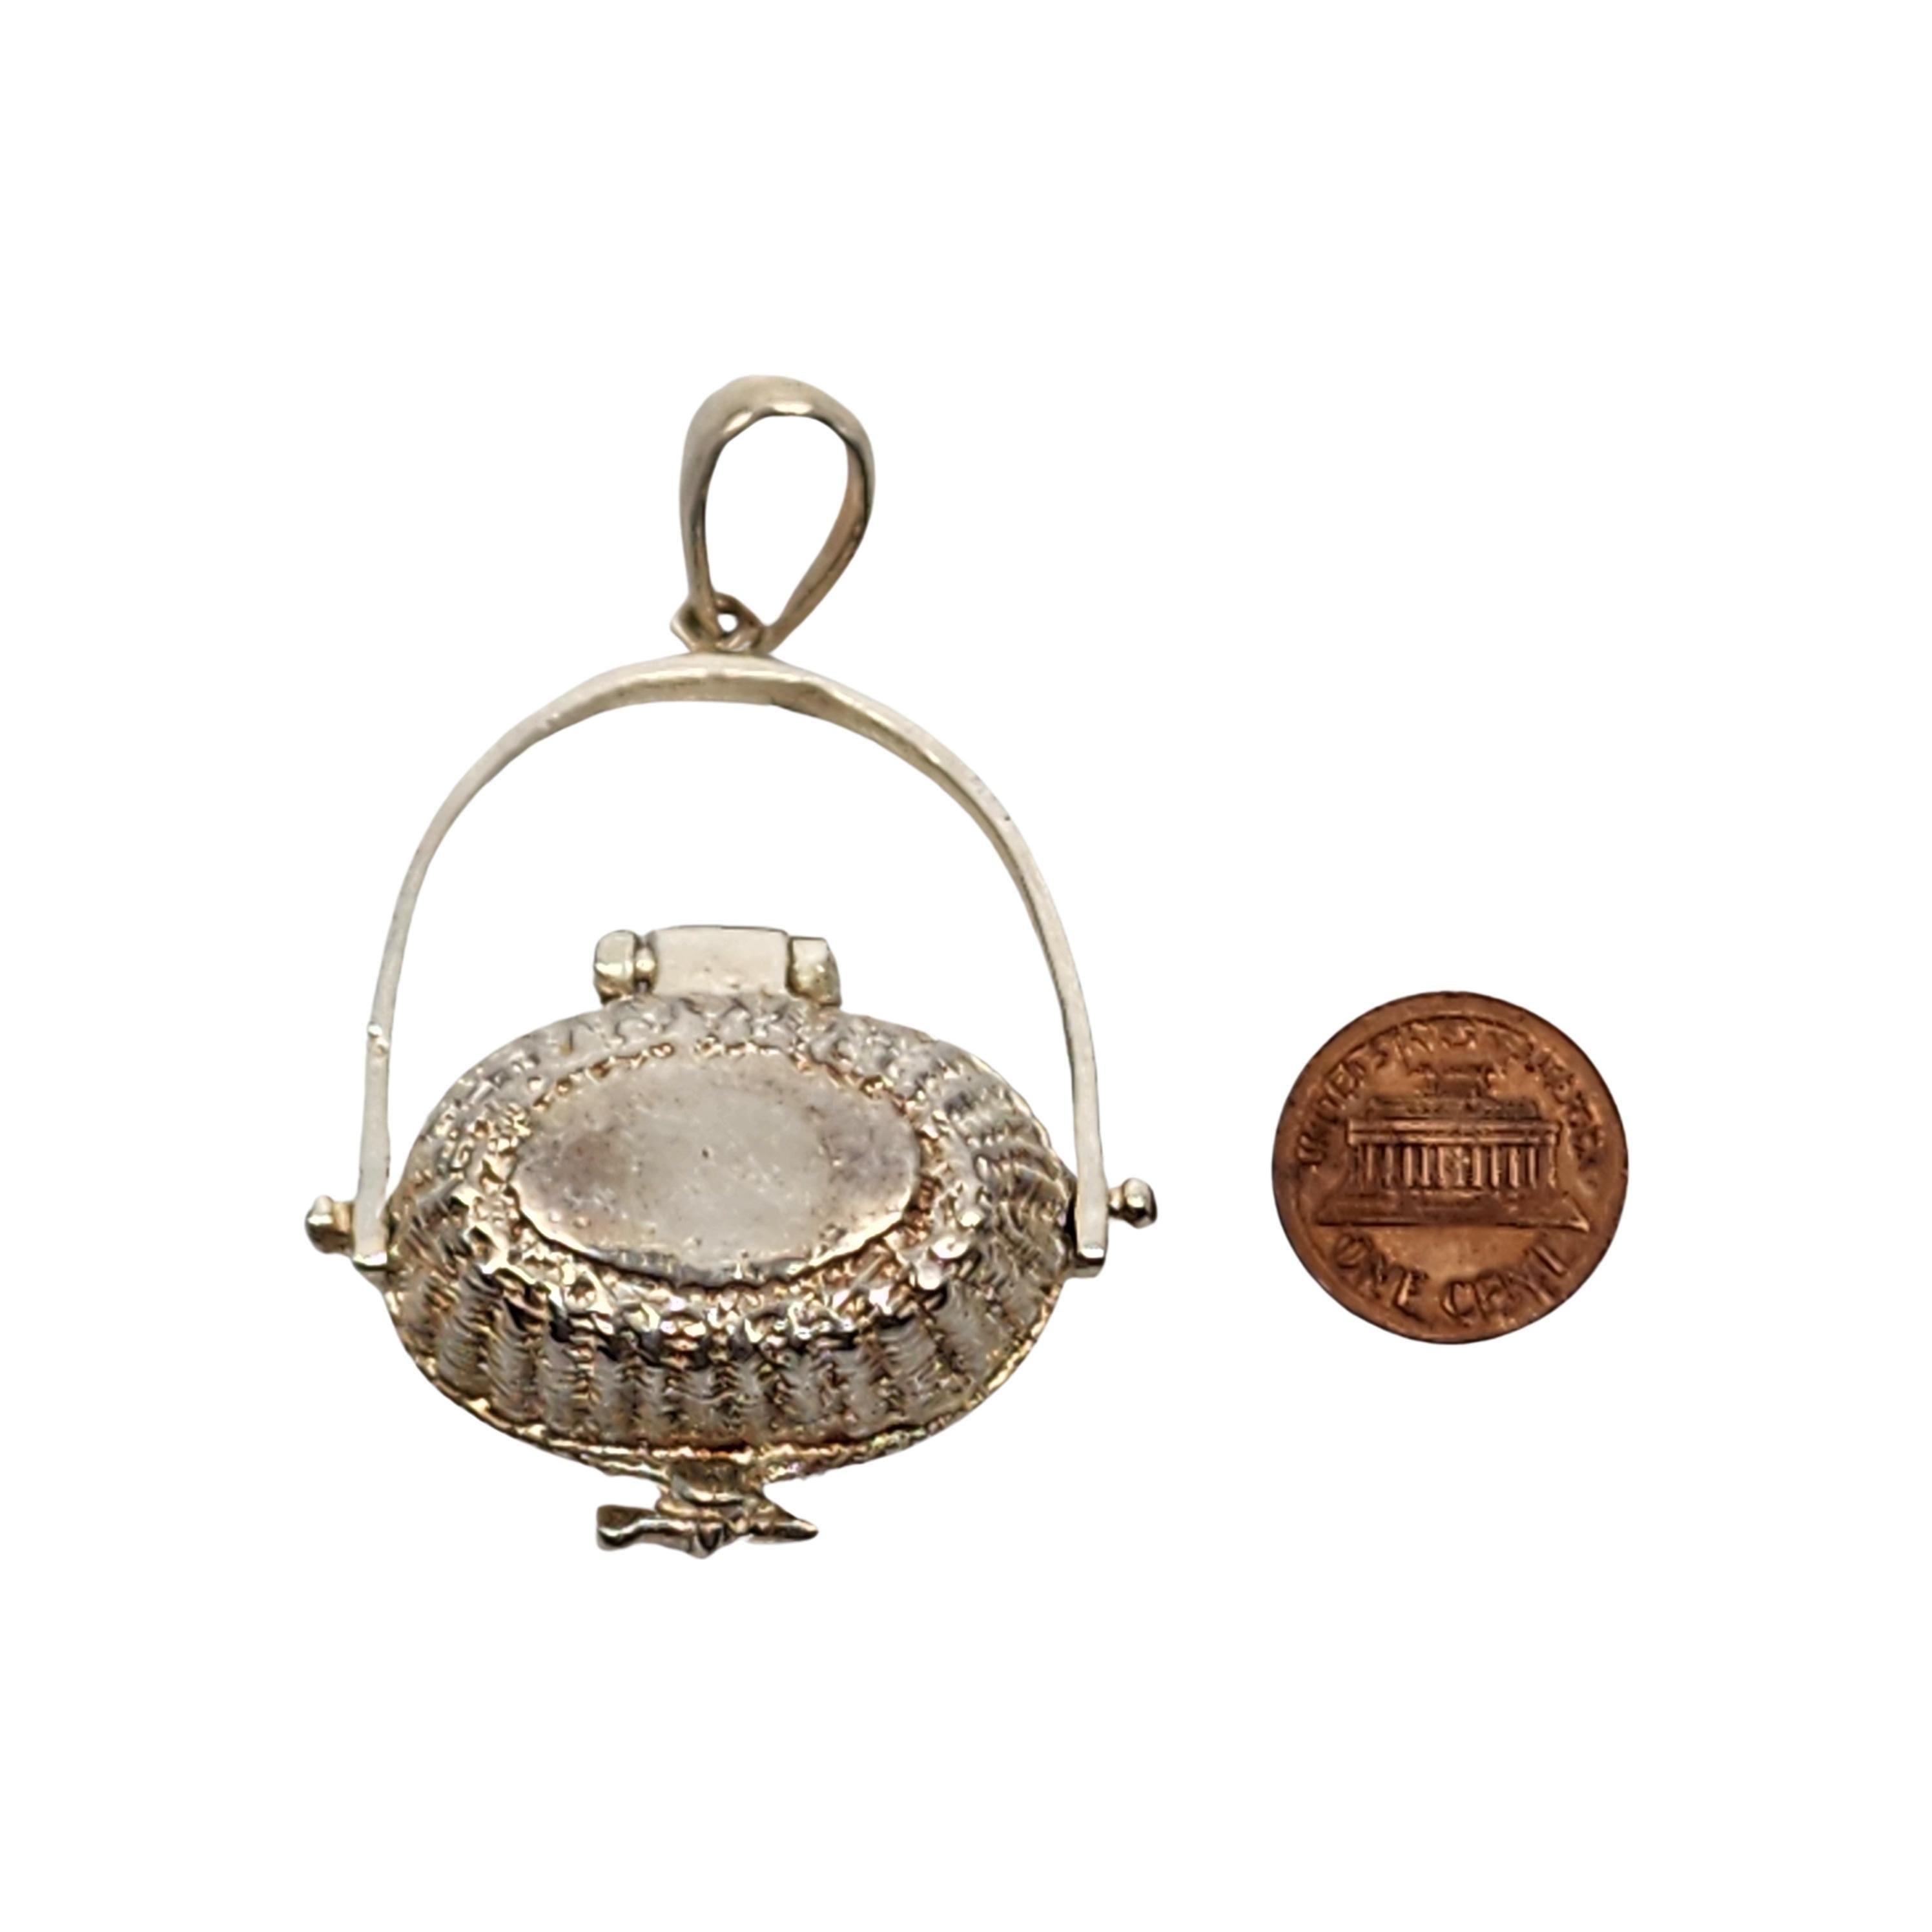 Sterling silver Nantucket Basket pendant with lucky penny.

A beautifully detailed basket with a lucky penny inside. The lid features a Nantucket lighthouse scene. The penny is part of a Nantucket legend that says throwing a penny into the sea while